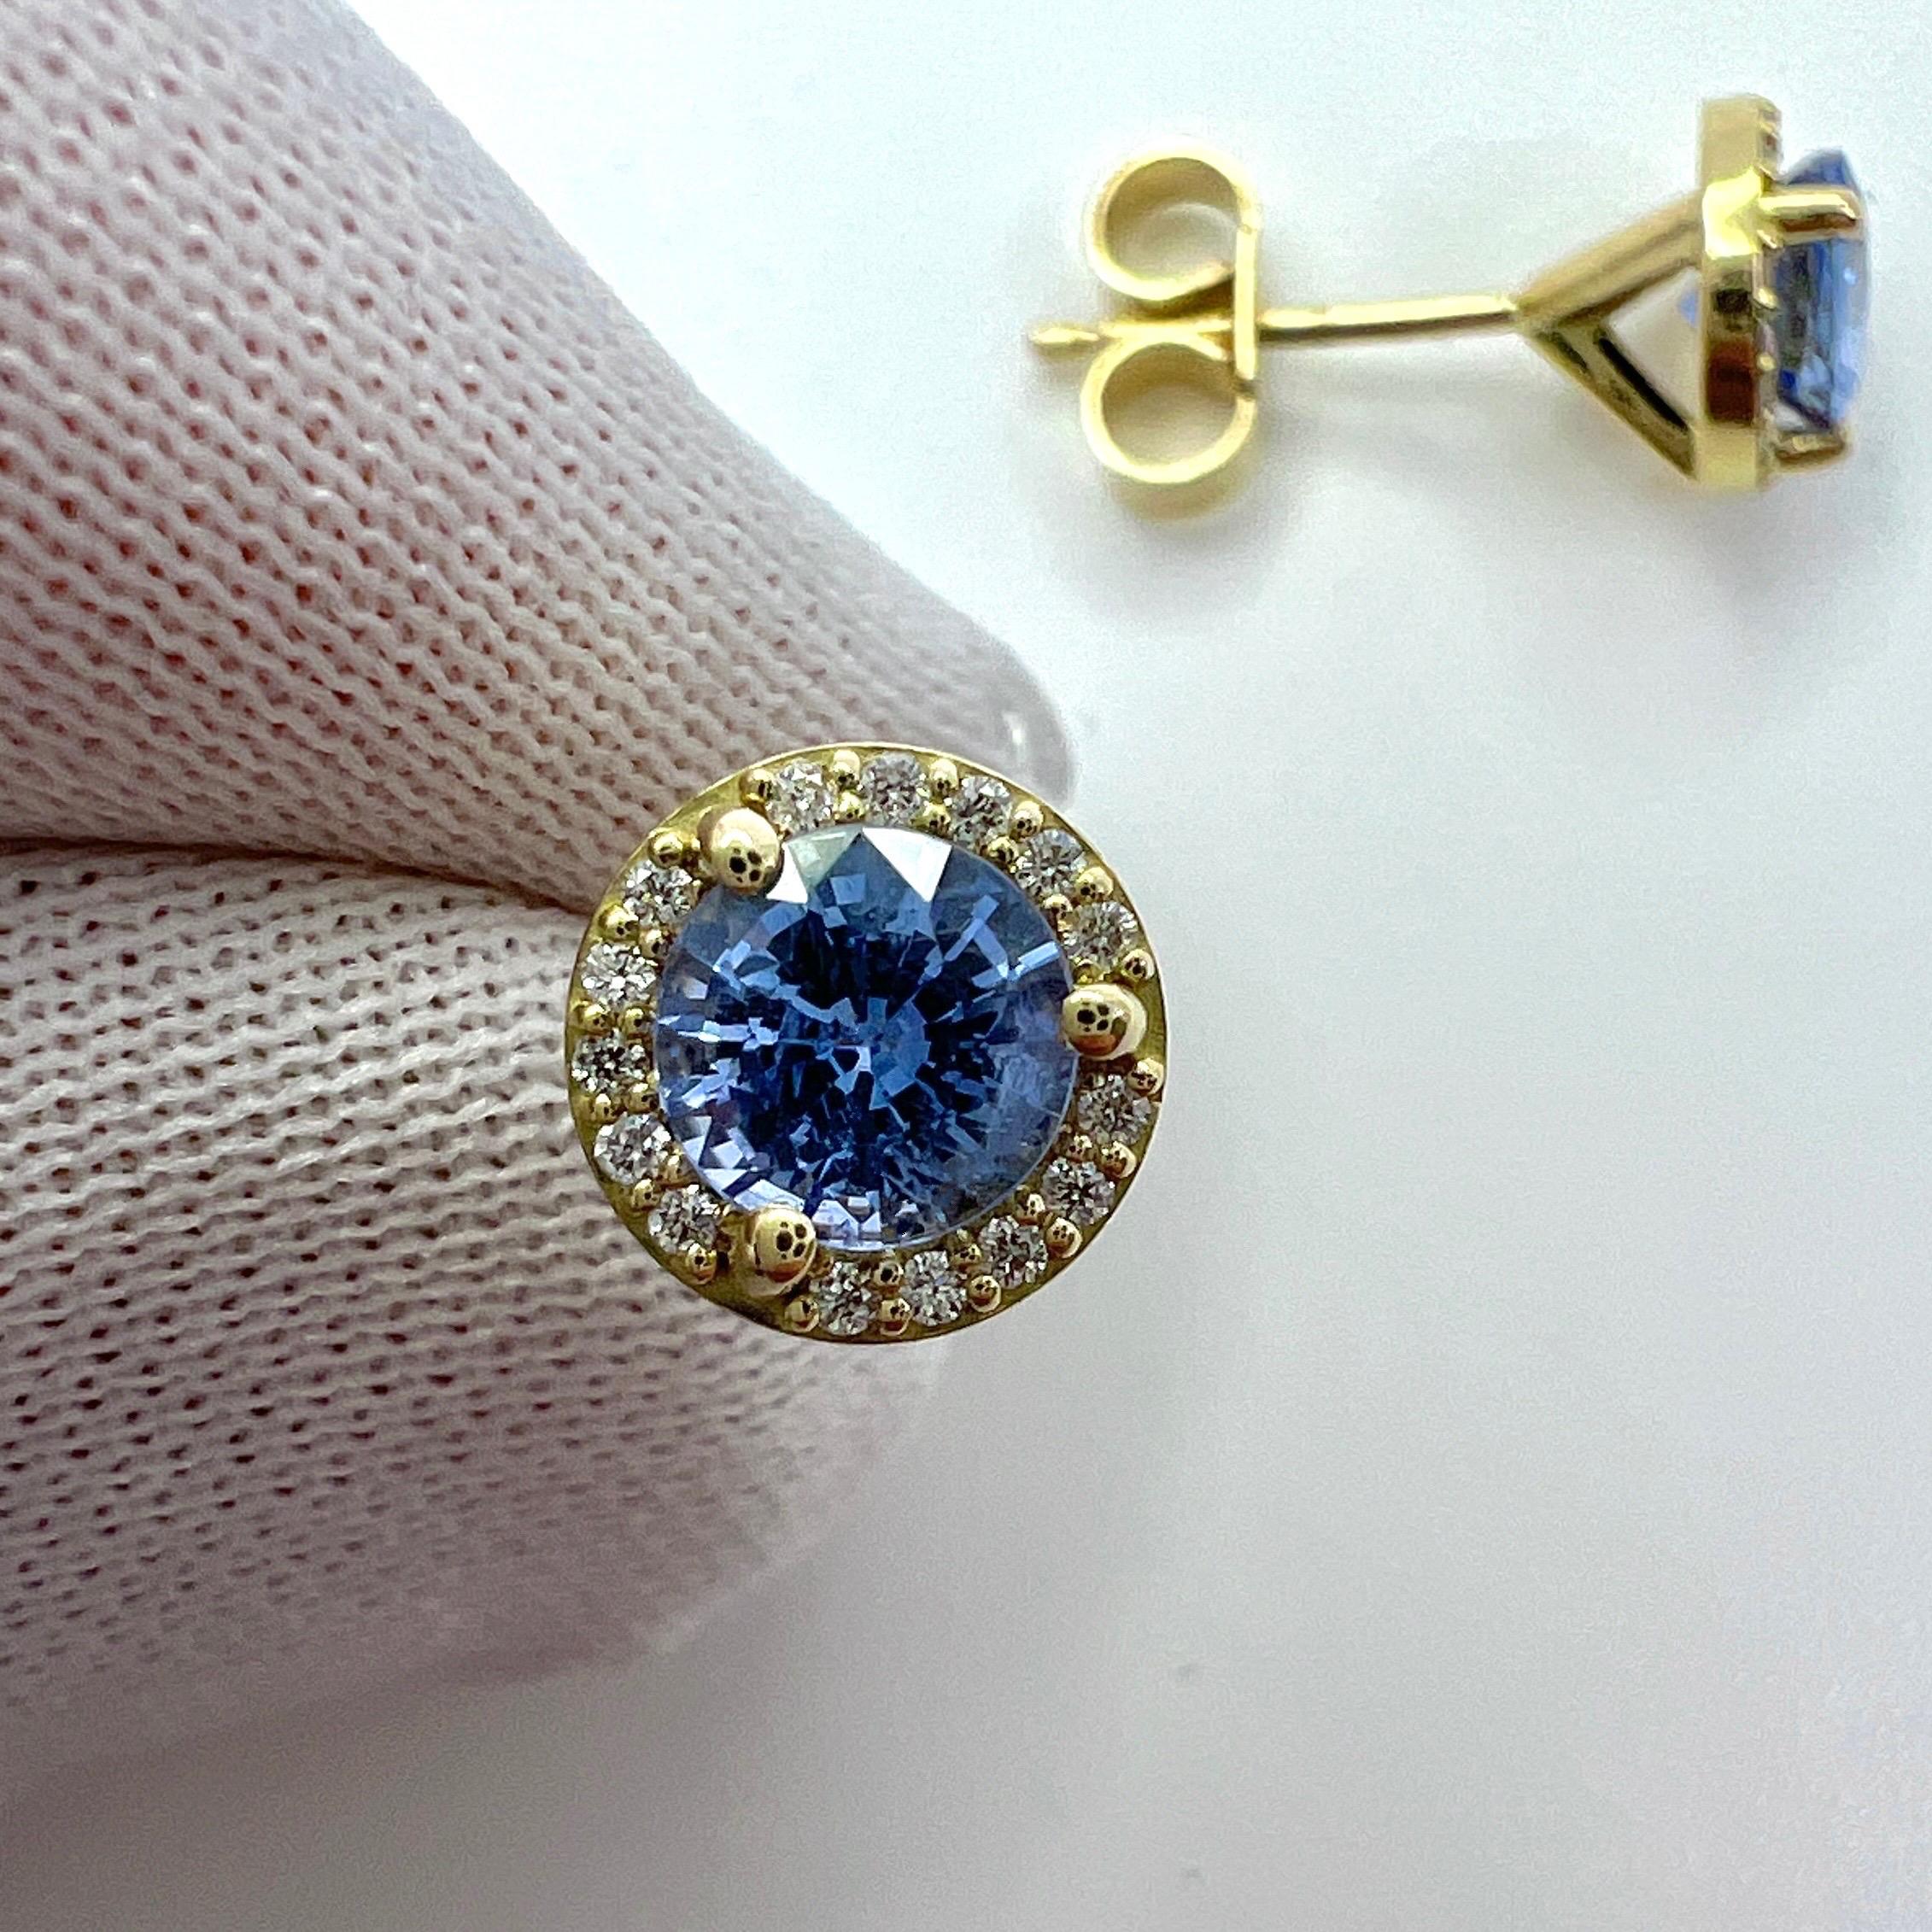 1.29 TCW. Top Grade Ceylon Light Blue Sapphire & Diamond 18k Yellow Gold Earring Halo Studs.

Light vivid blue 1.13ct 5mm Ceylon sapphires with a bright vibrant colour, excellent clarity and an excellent round brilliant cut. 

Fine quality and good